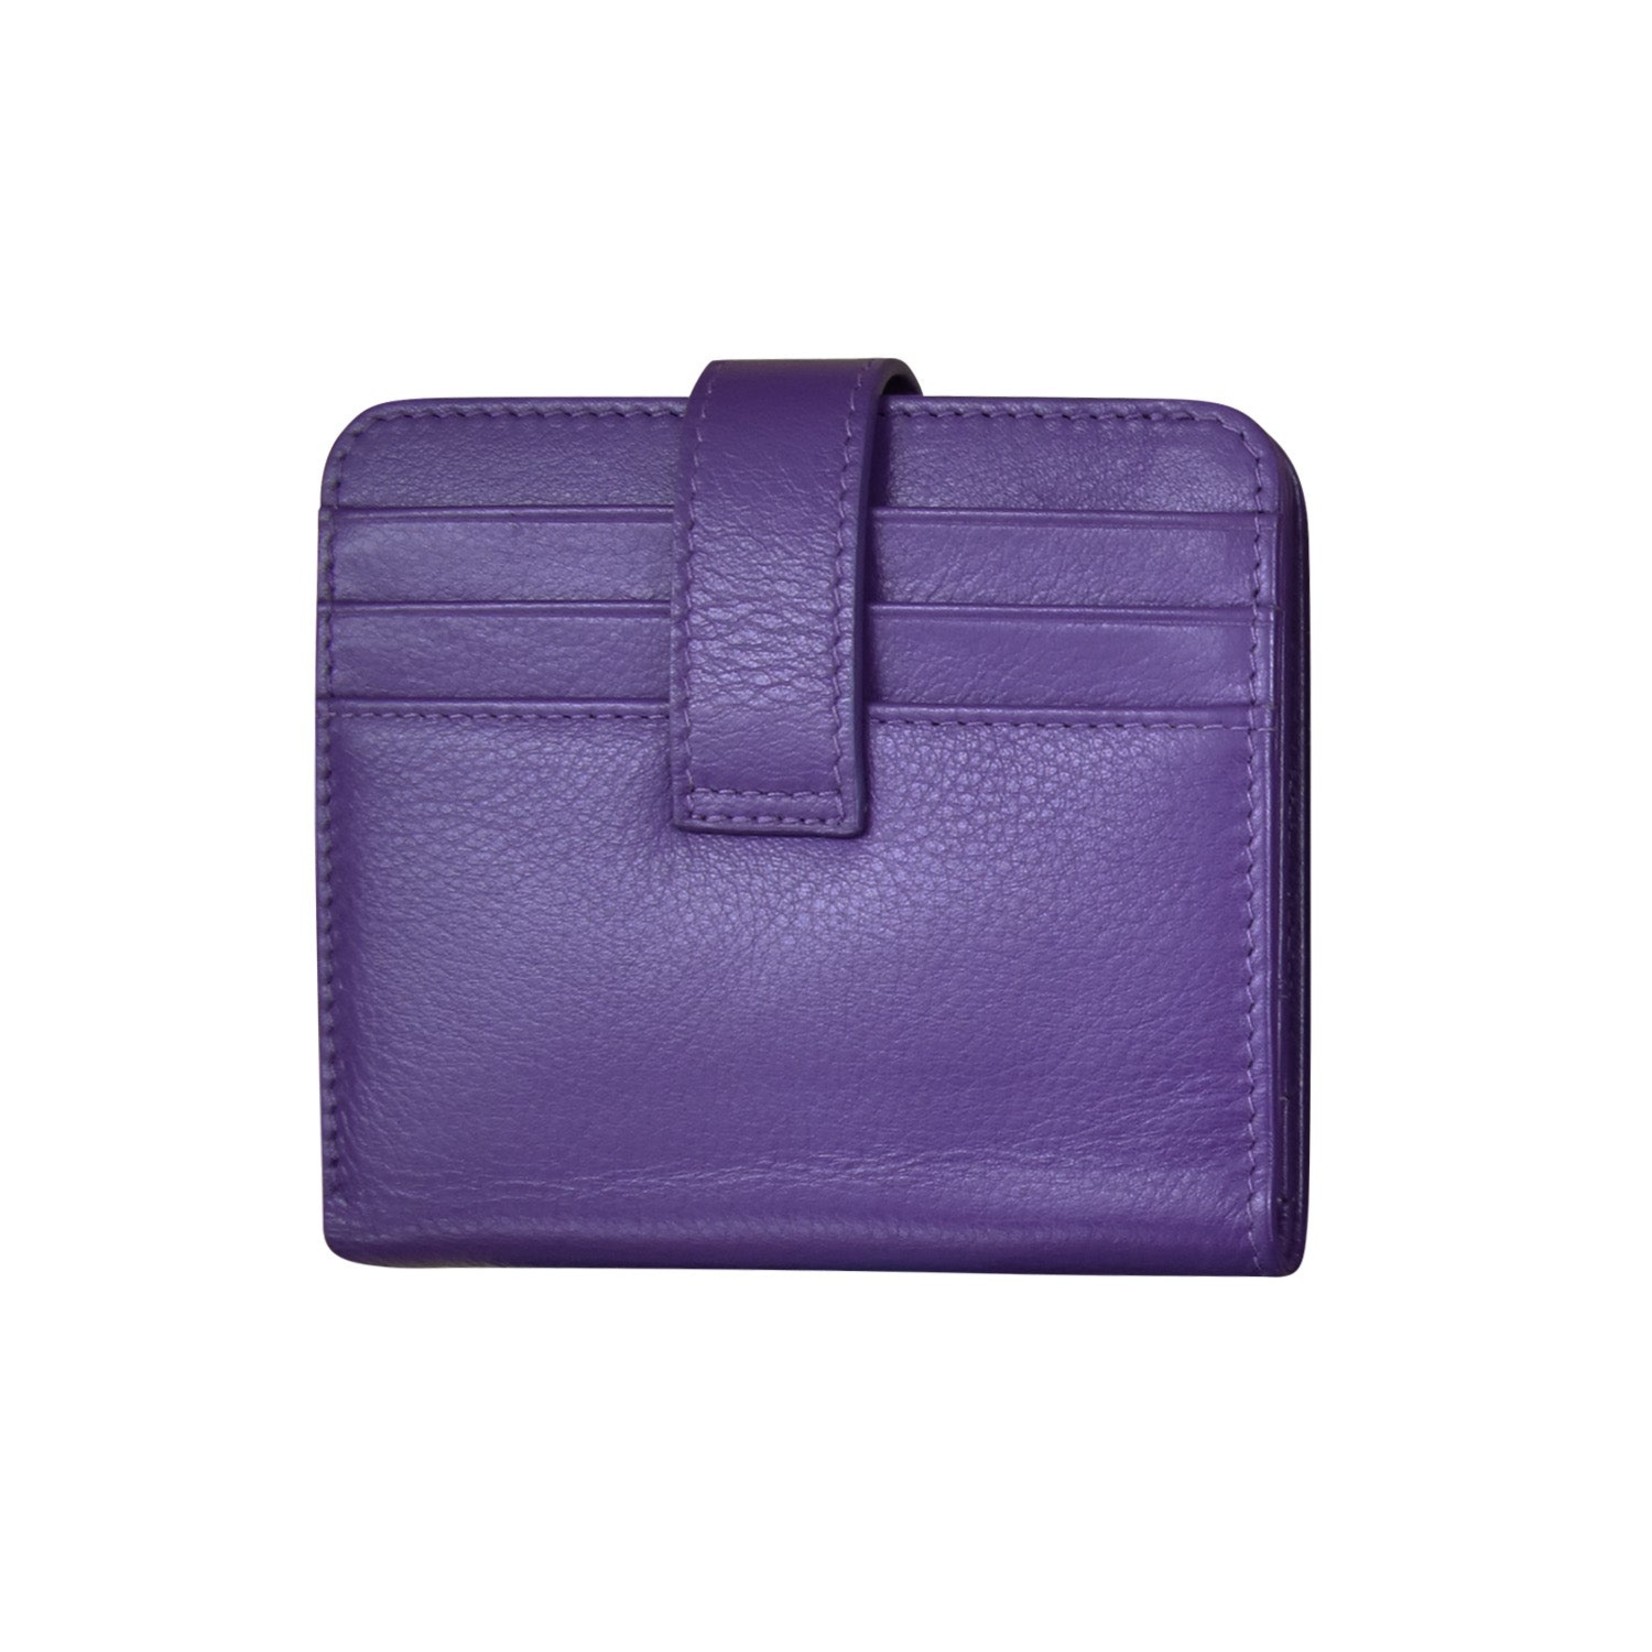 Leather Handbags and Accessories 7301 Purple - RFID Small Wallet